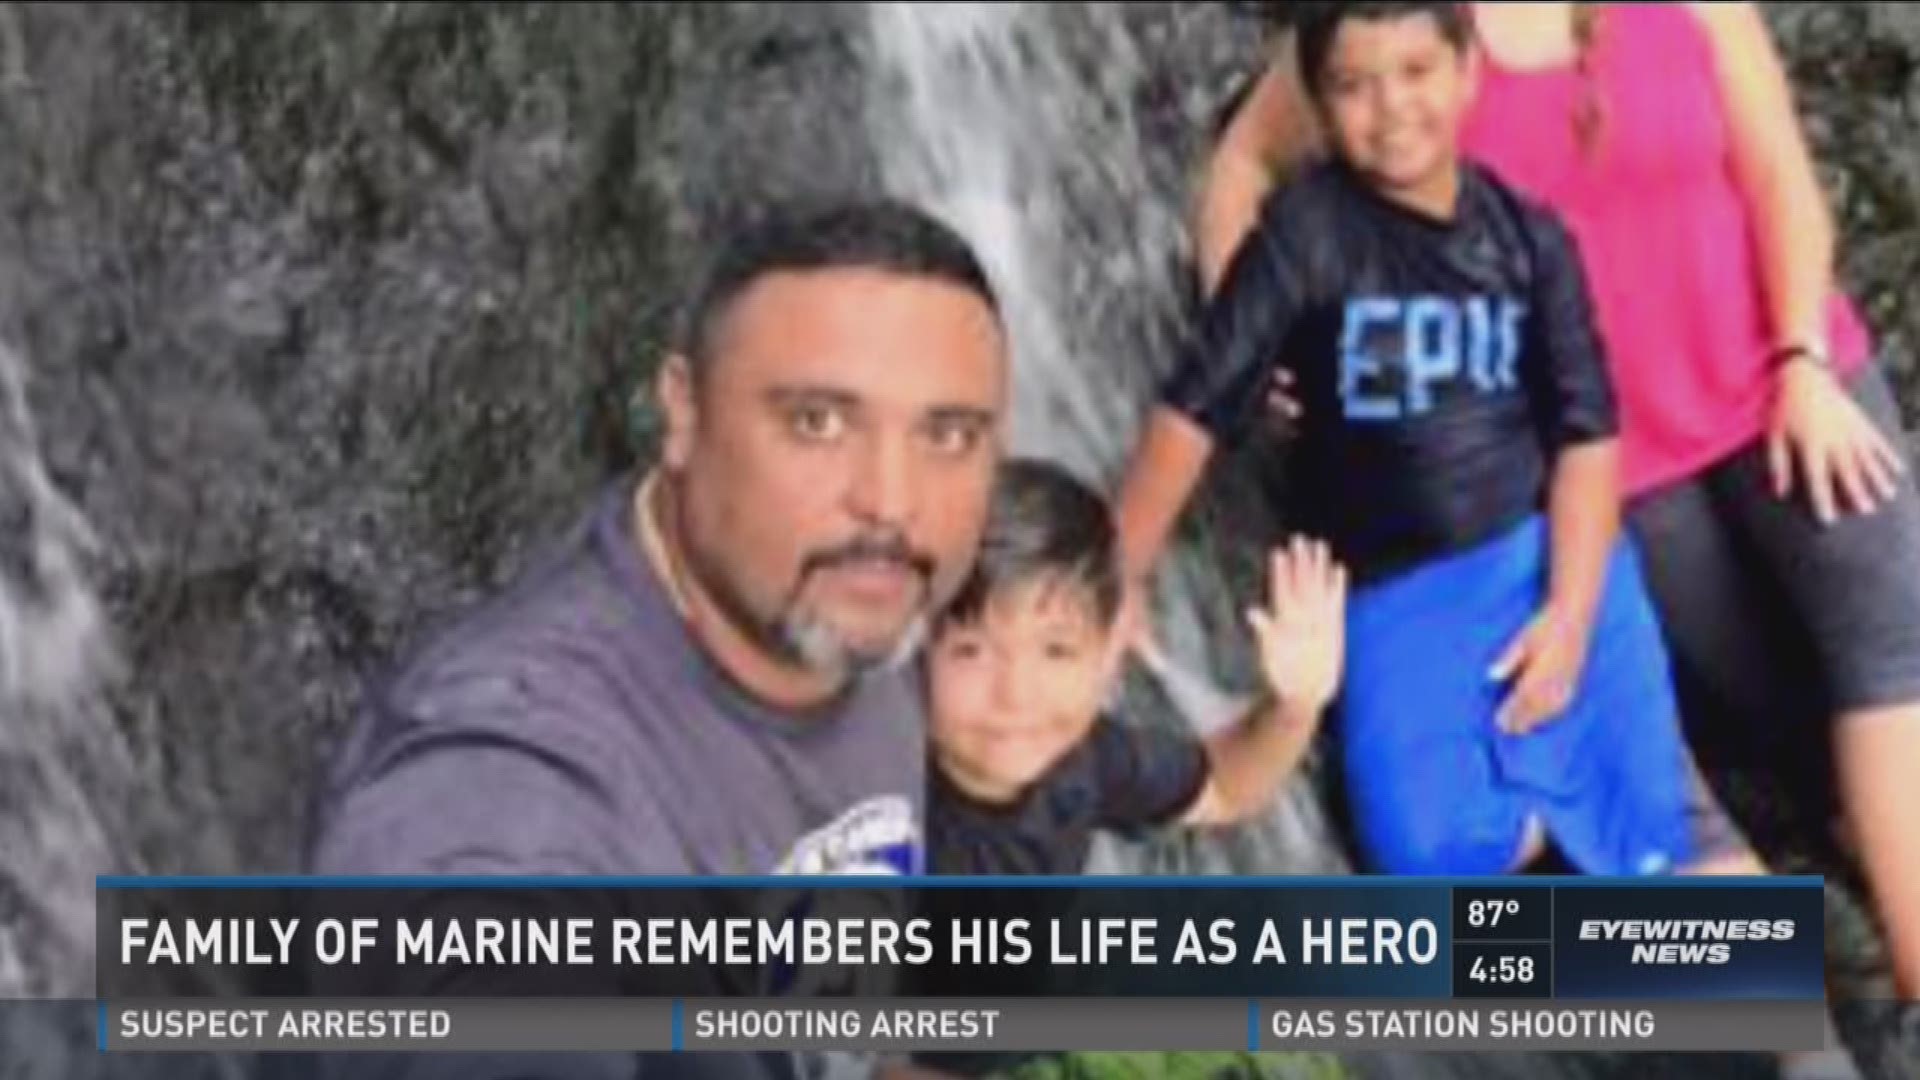 Family of Marine remembers his life as a hero